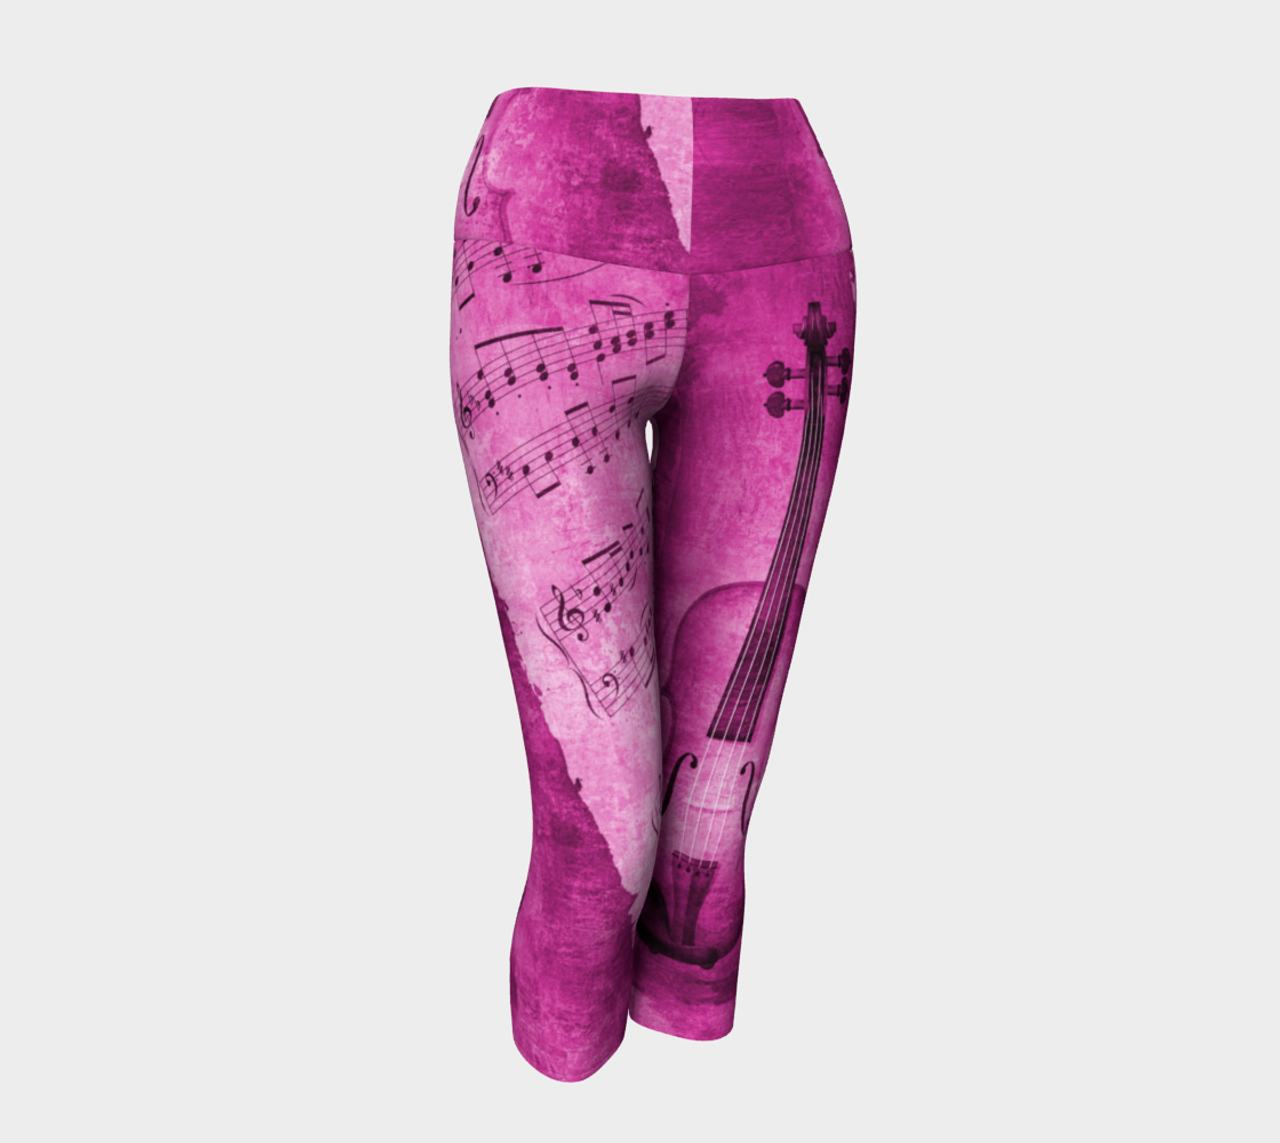 Pink Violin Yoga Leggings Capris - Made in Canada  Compression Leggings  Made of Performance Knit Fabric